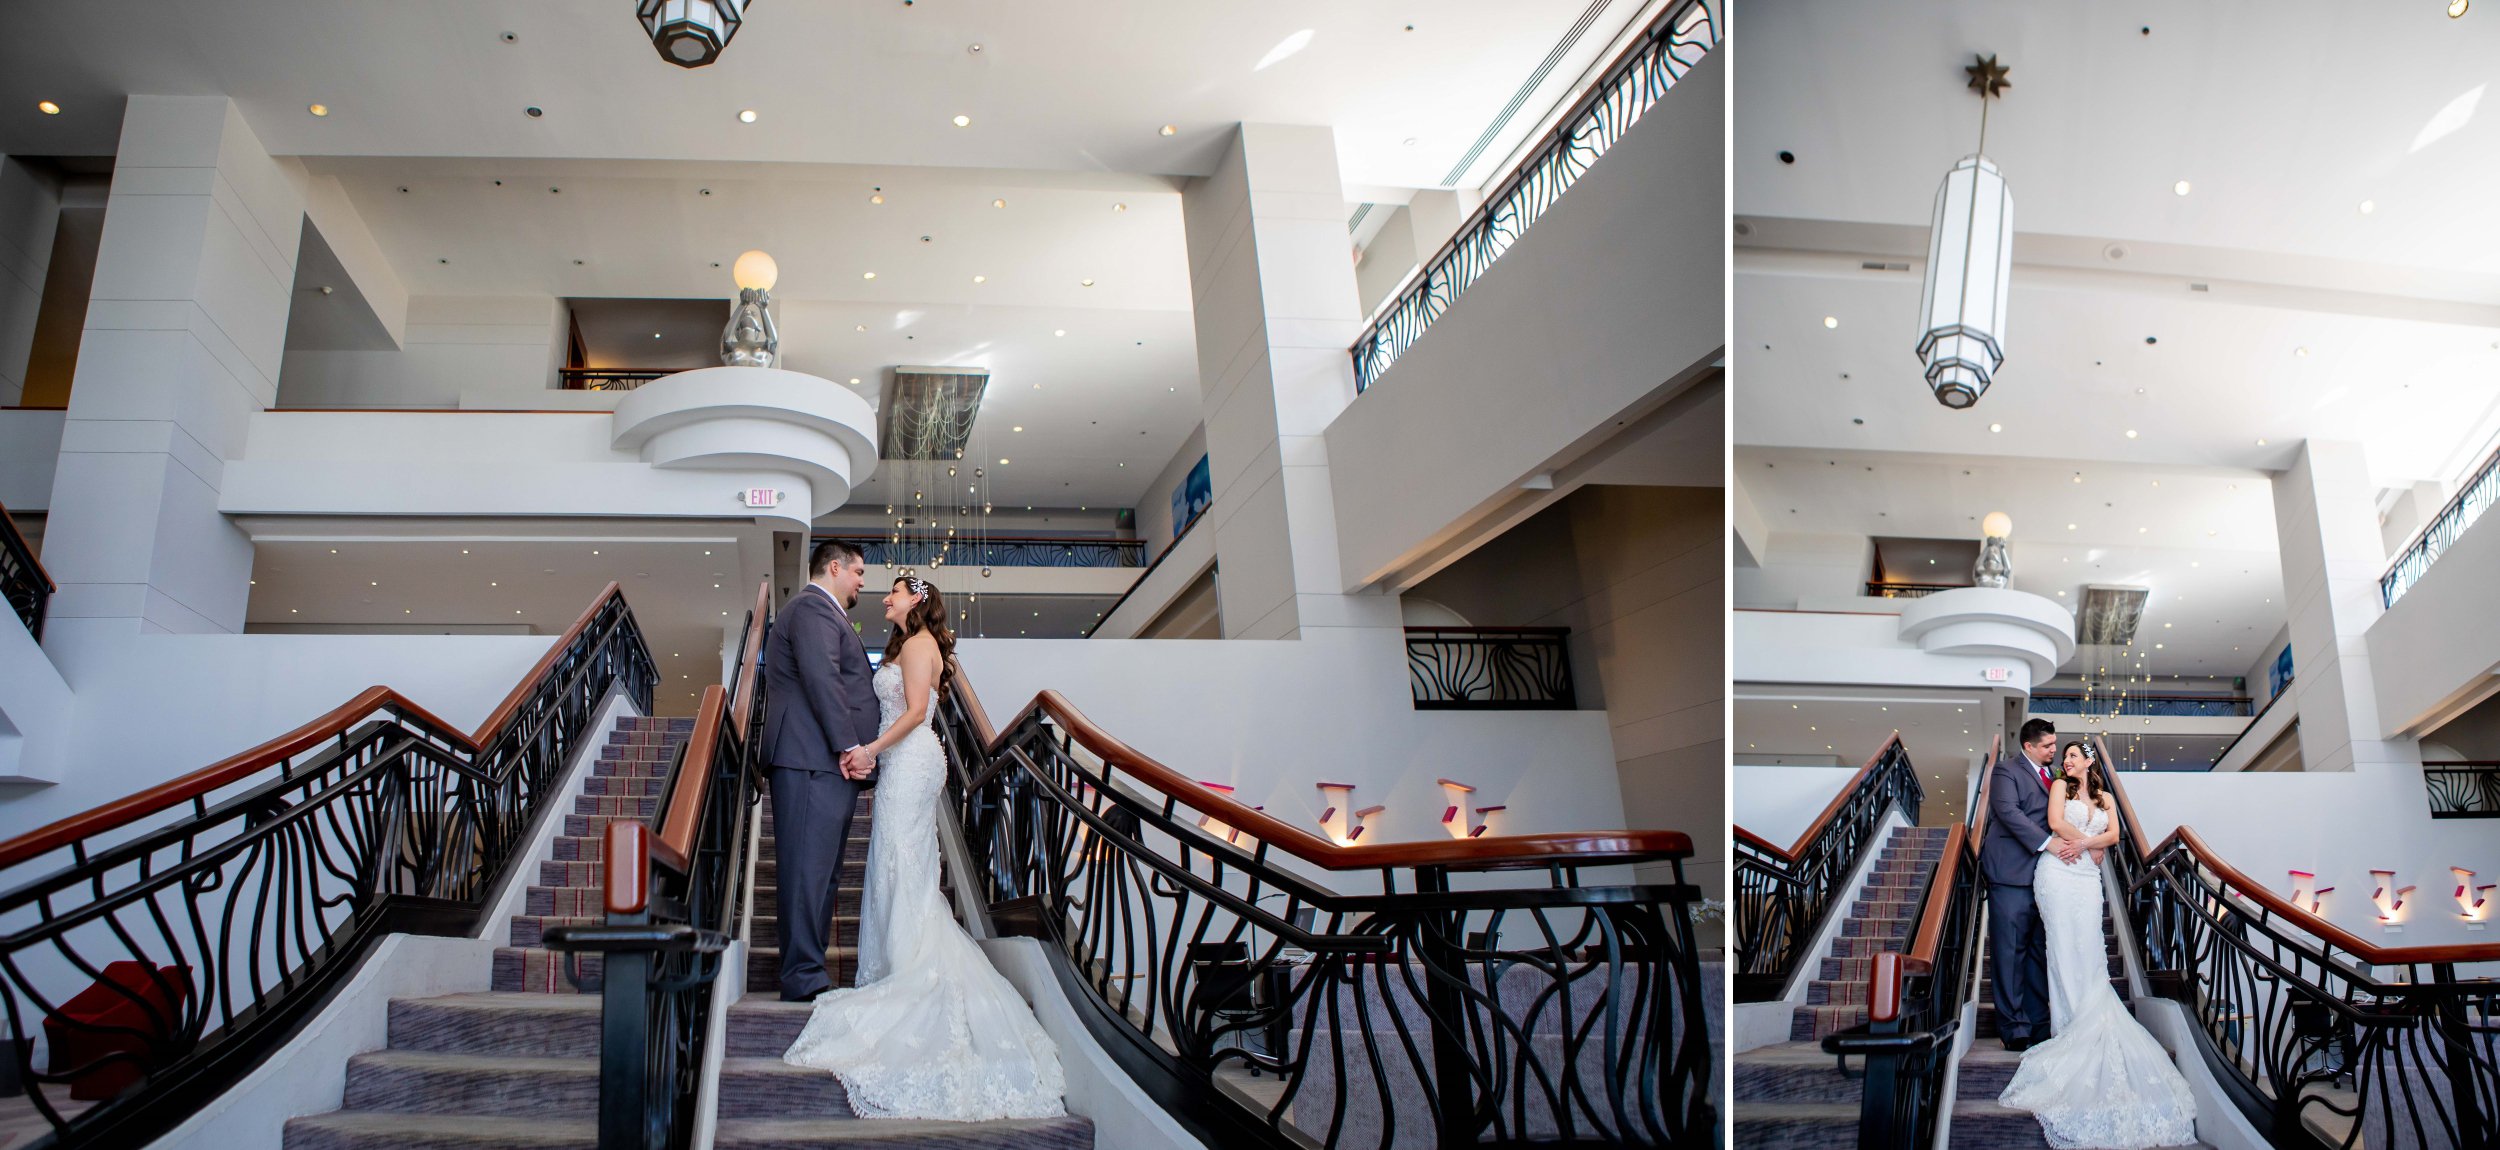 Wedding FIRST UNITED METHODIST CHURCH OF CORAL GABLES - Photography by Santy Martinez 19.jpg